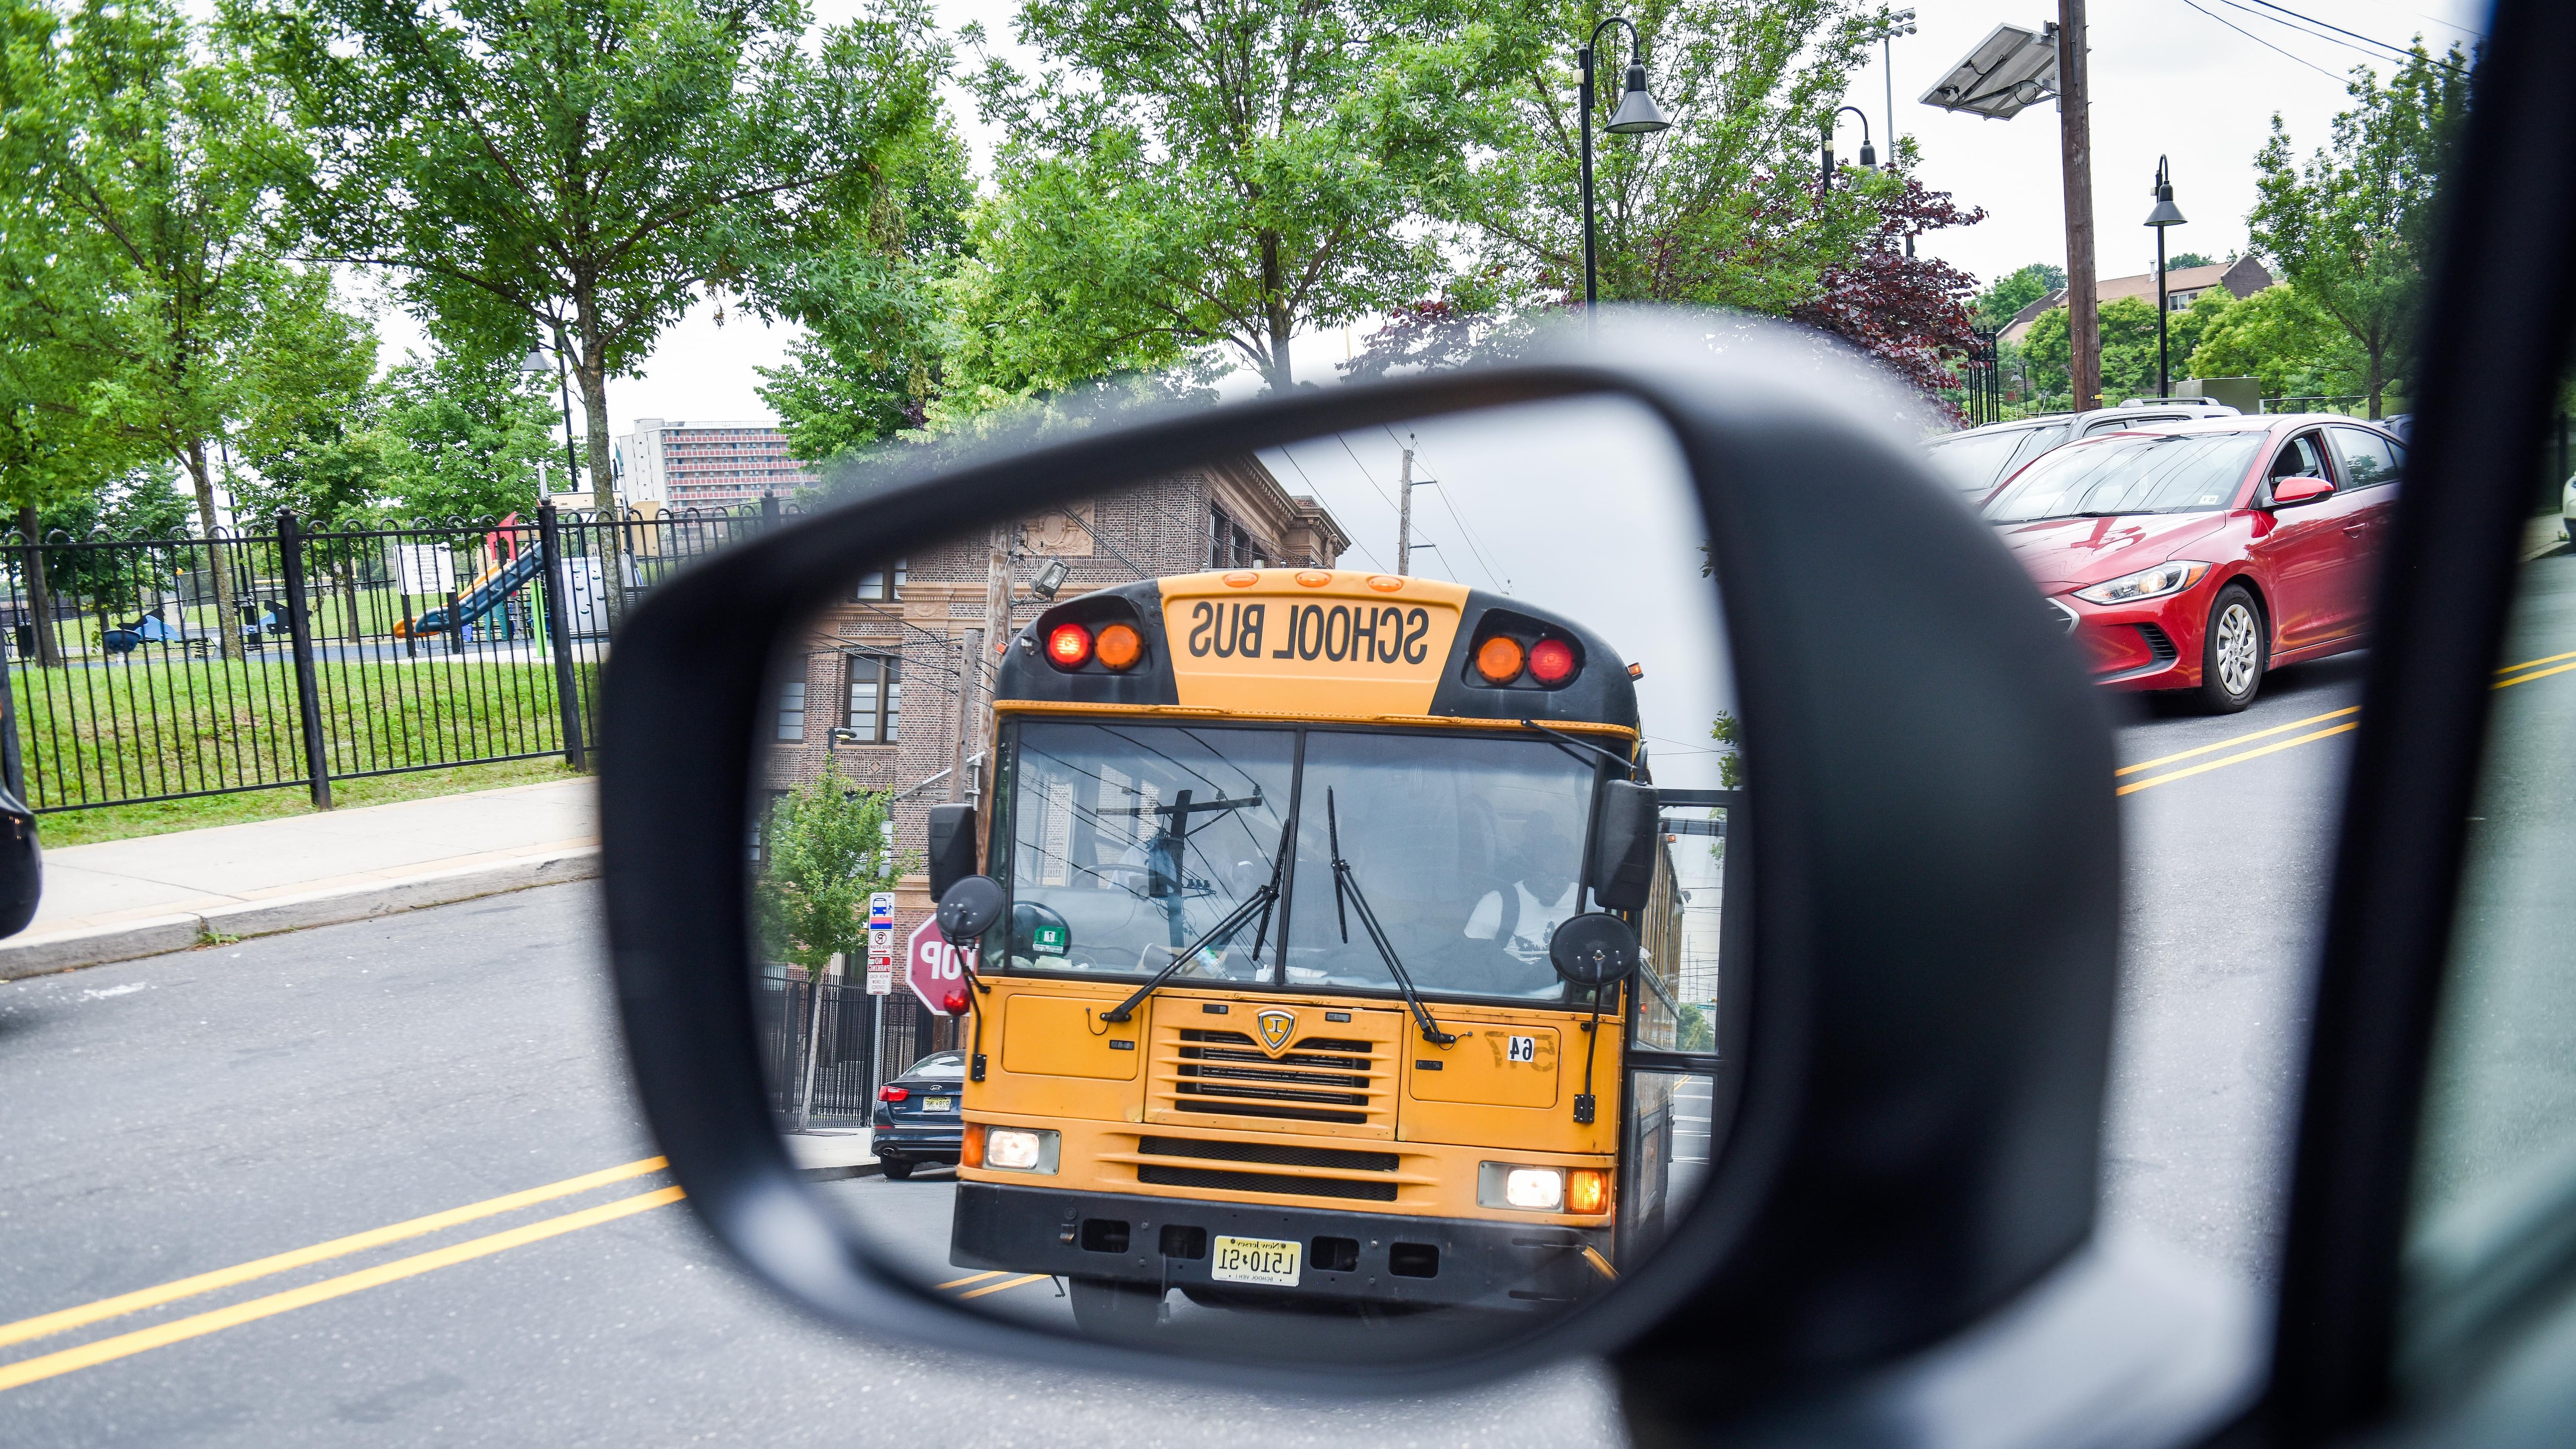 A yellow school bus is seen in the reflection of a car's sideview mirror.